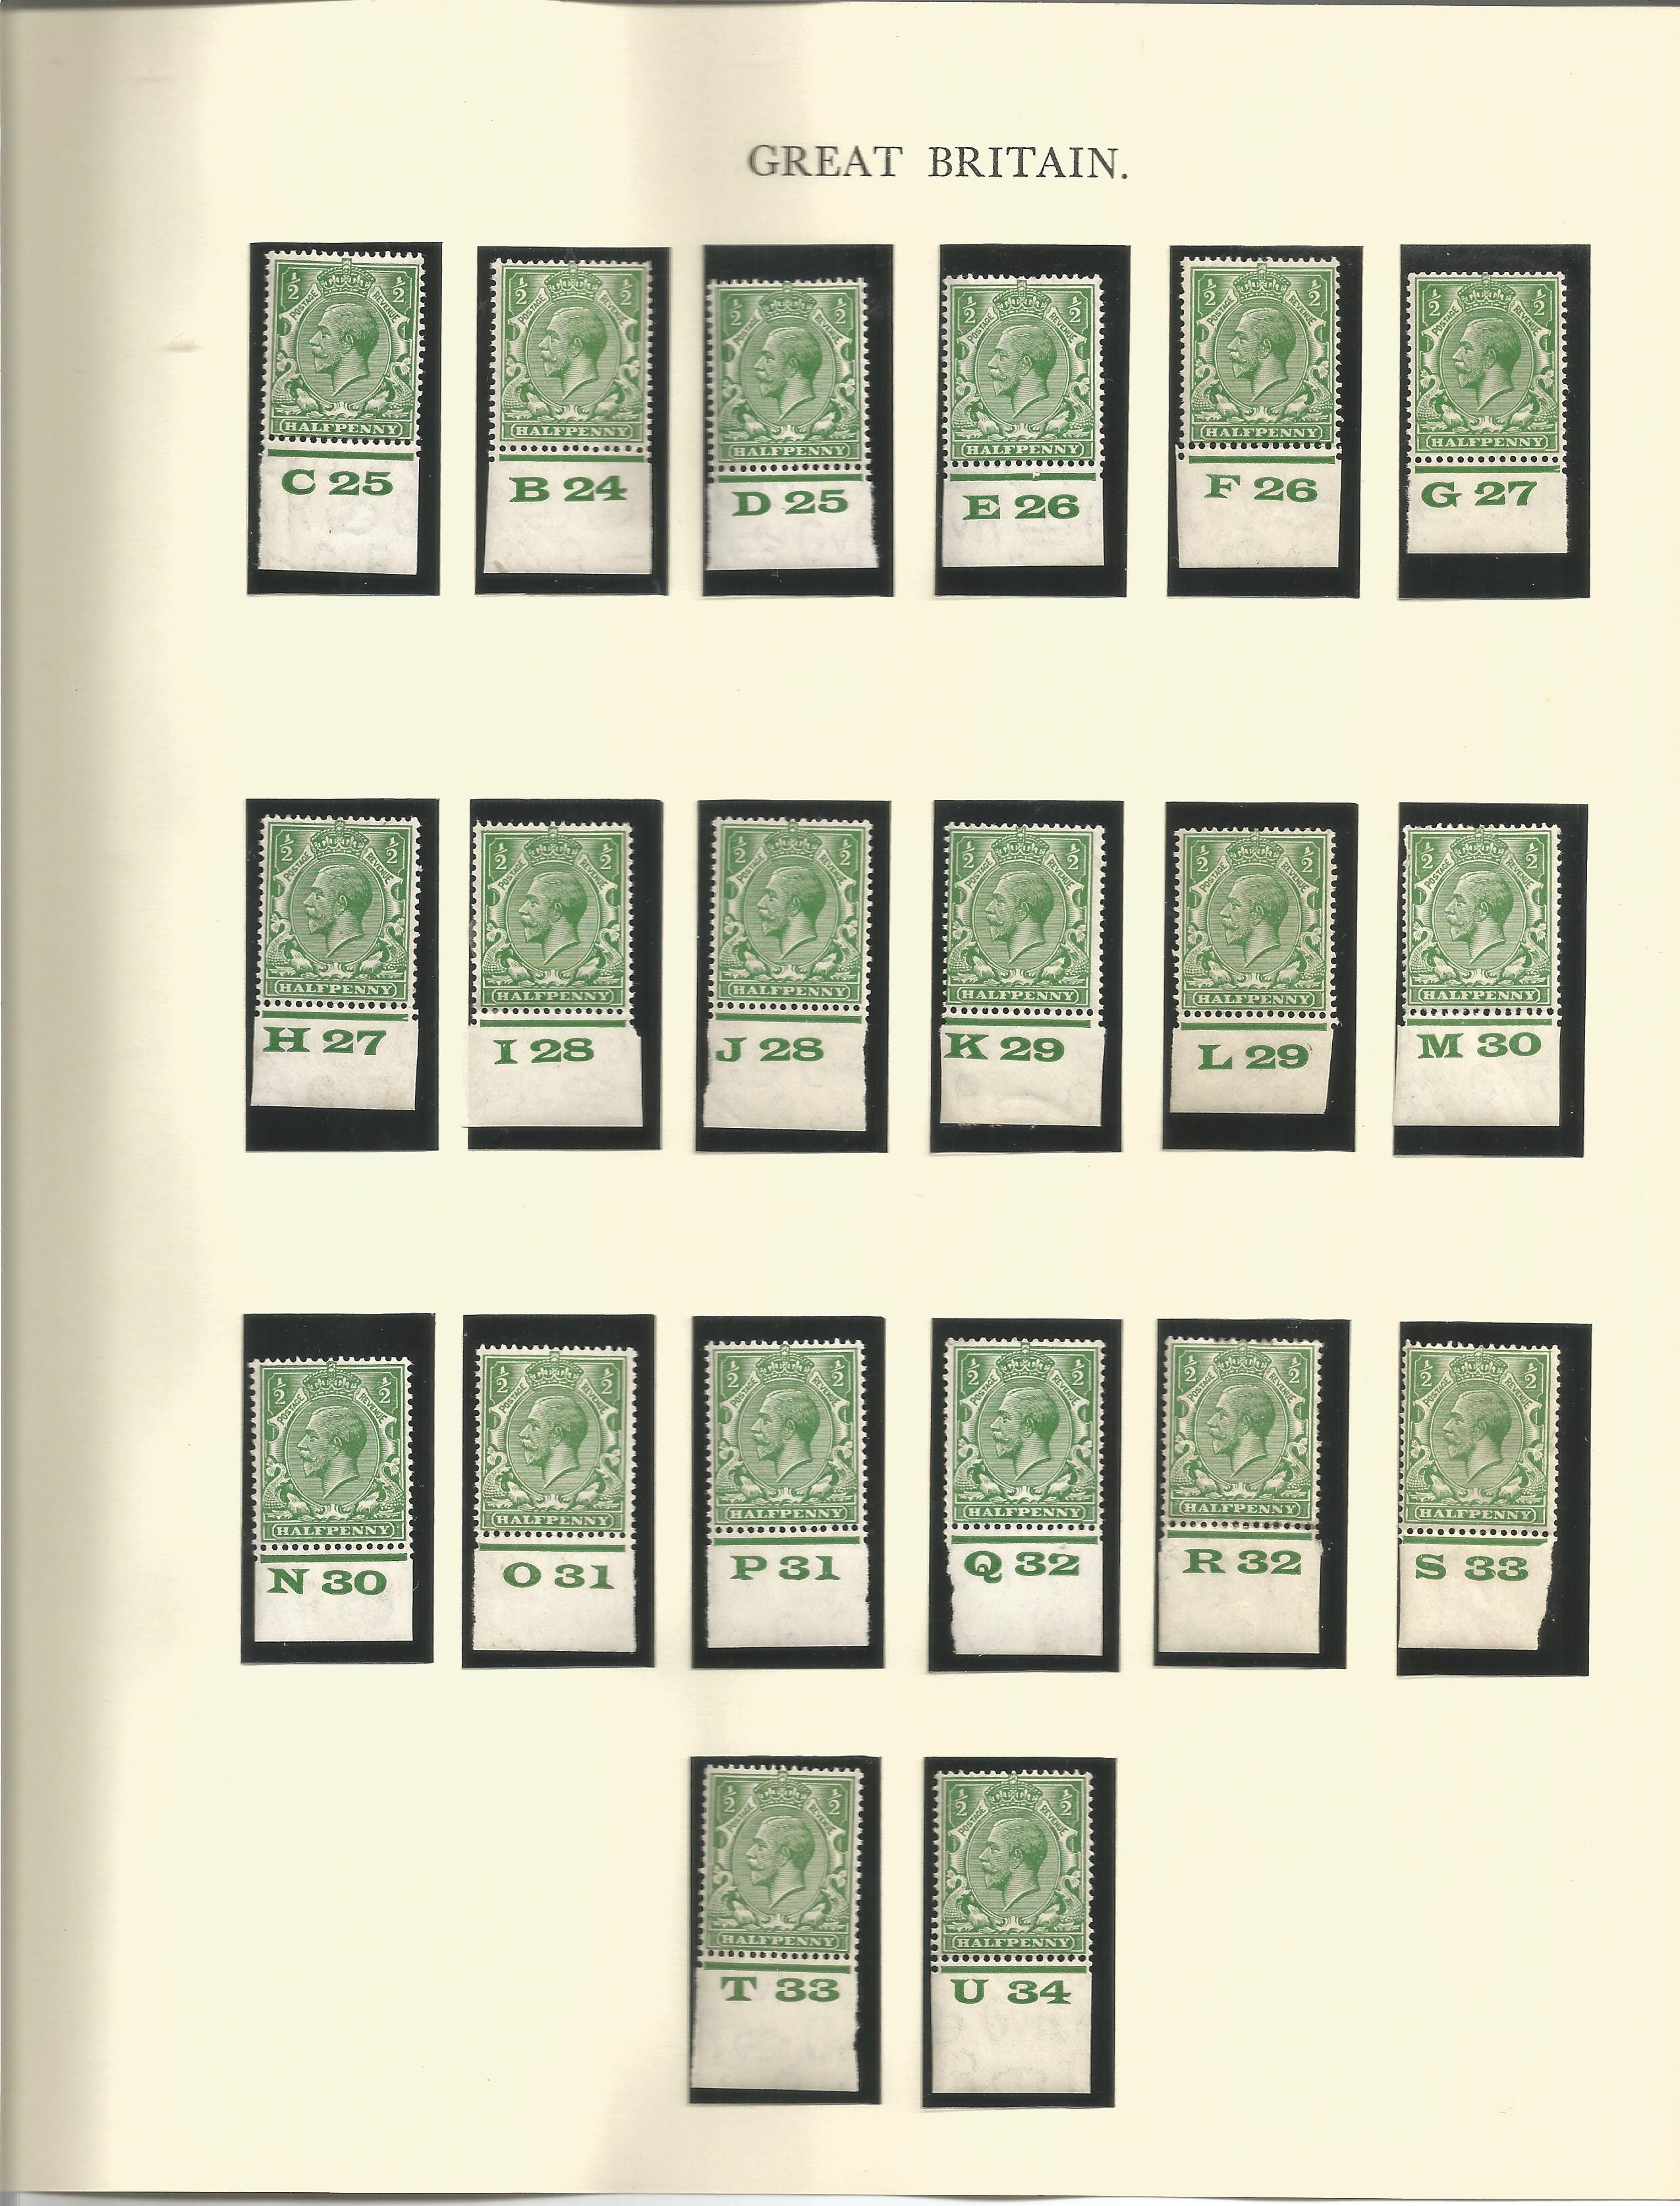 GB mint Stamps 20 x George V SG418 Half Penny Green Mint Stamps with Control numbers, 20 x George